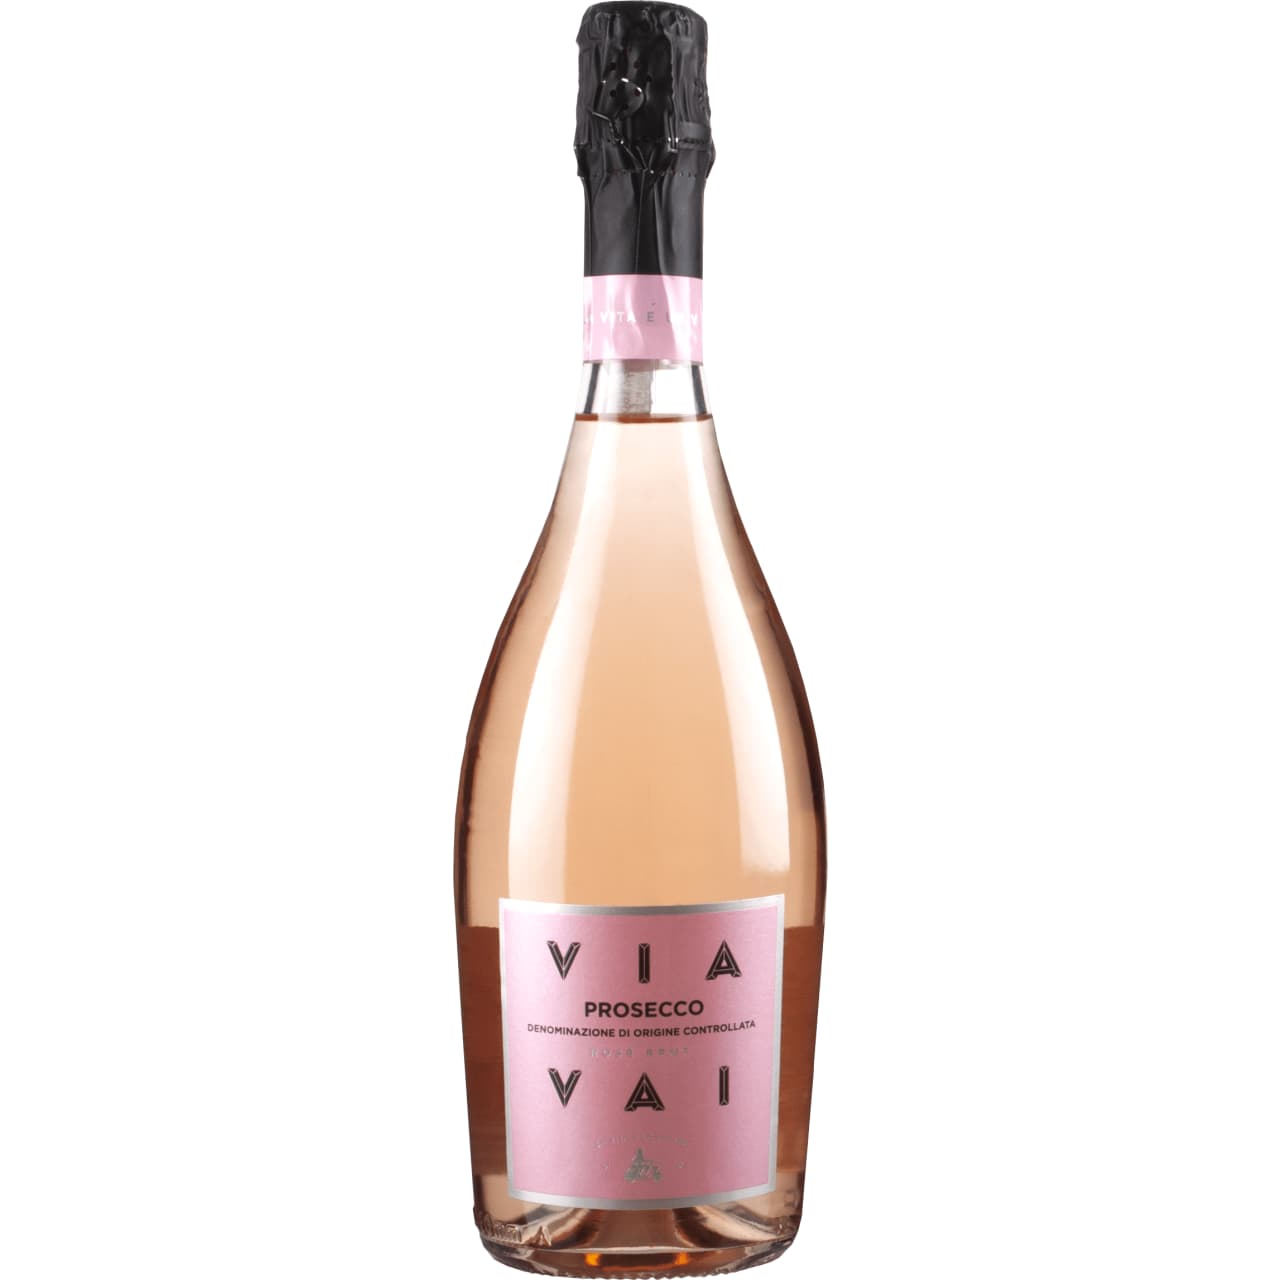 A beautiful fresh and light sparkling rose with hints of strawberries alongside a creamy mousse and the crisp finish.